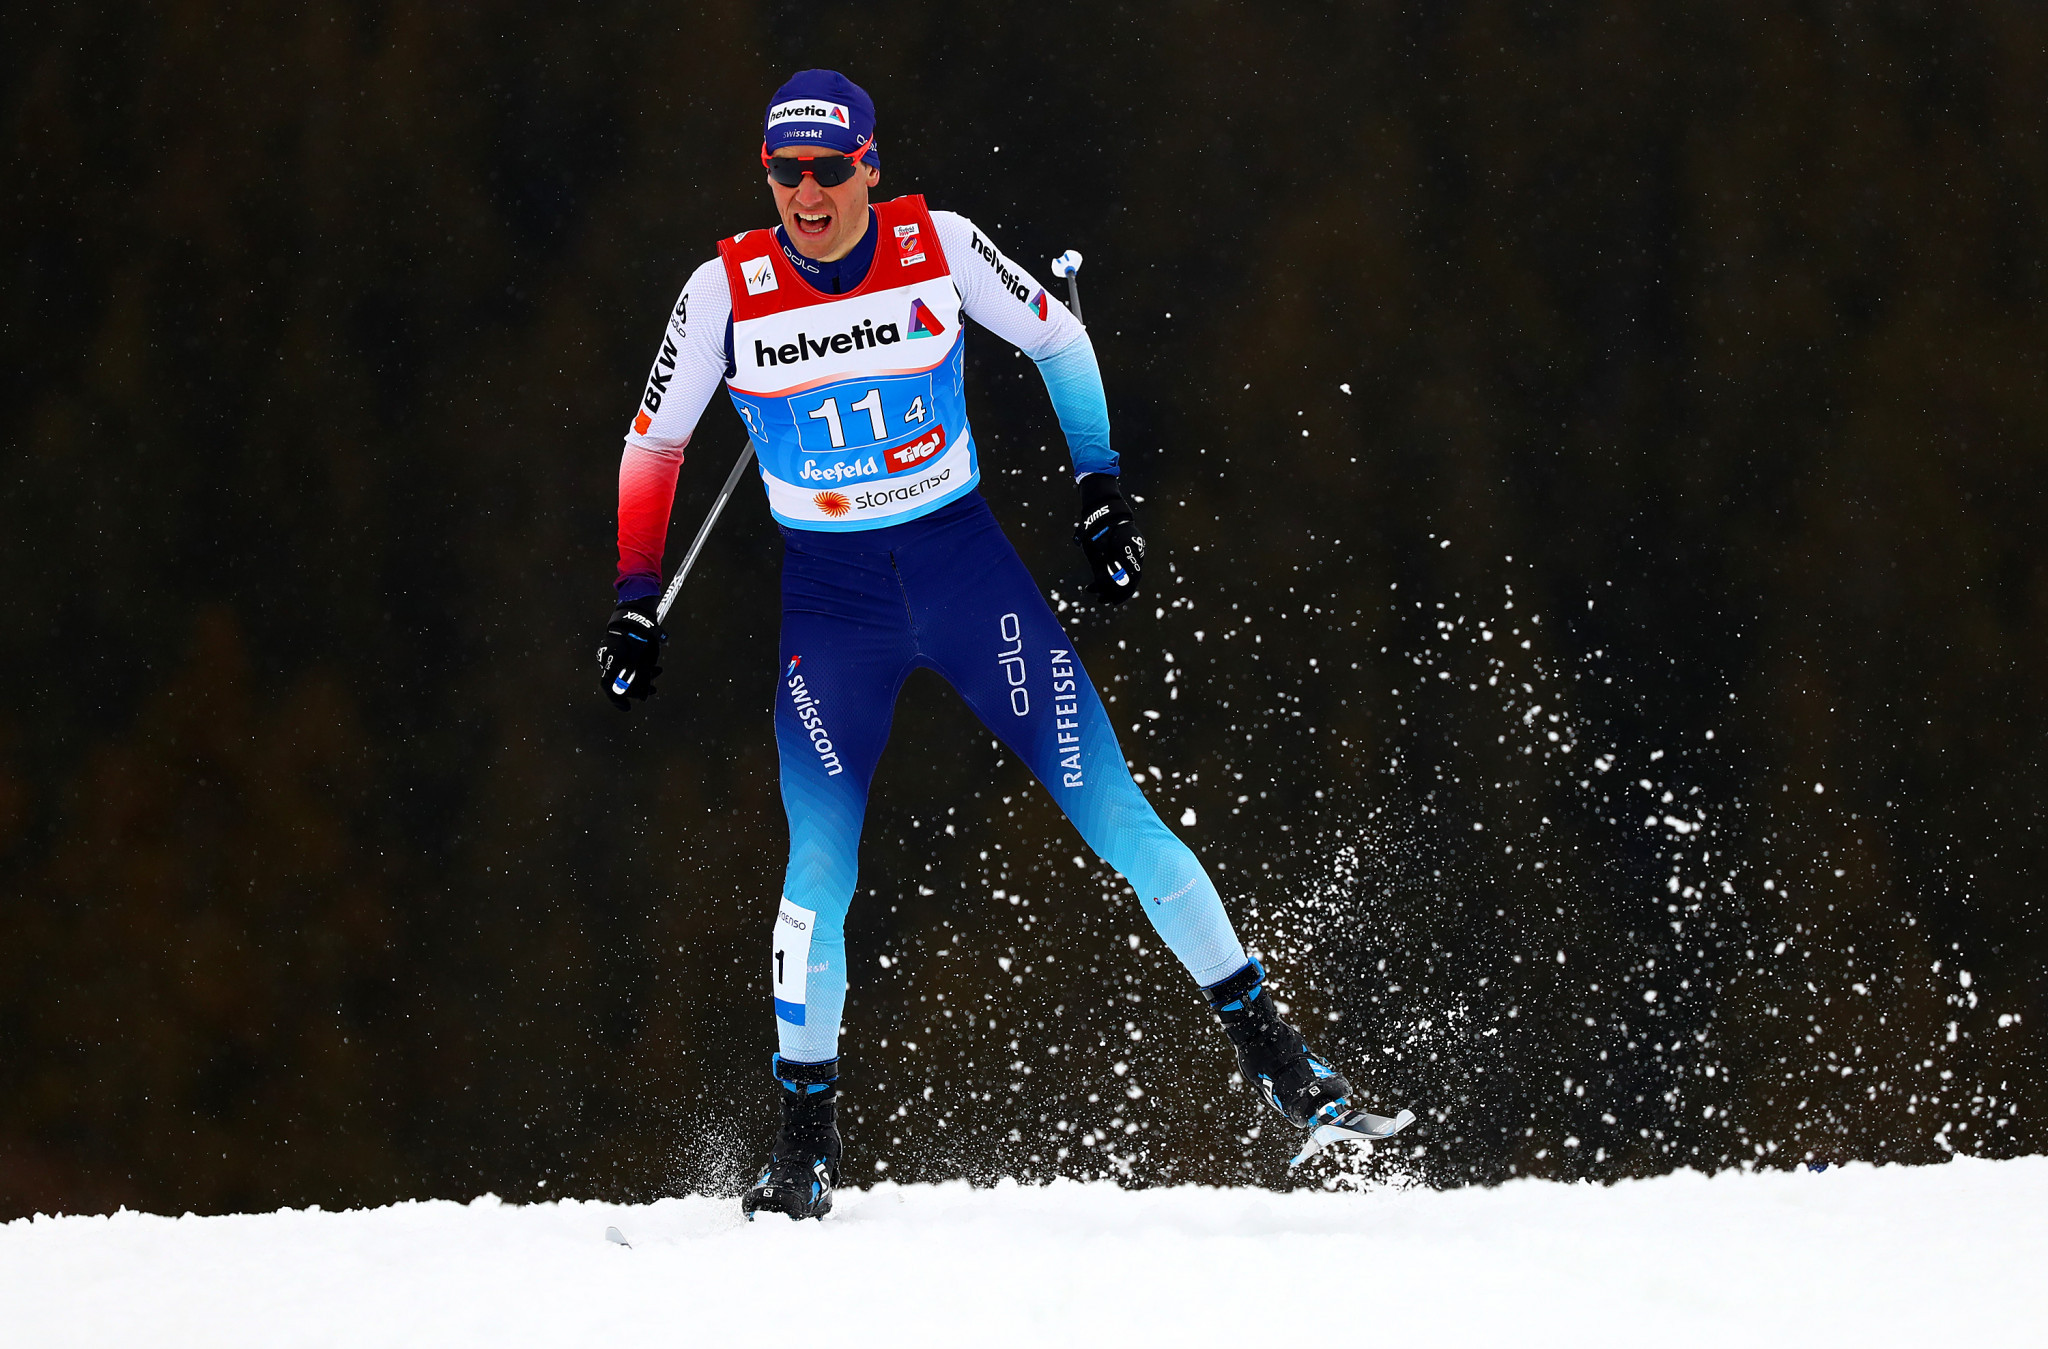 Four-time Winter Olympian Livers announces cross-country skiing retirement